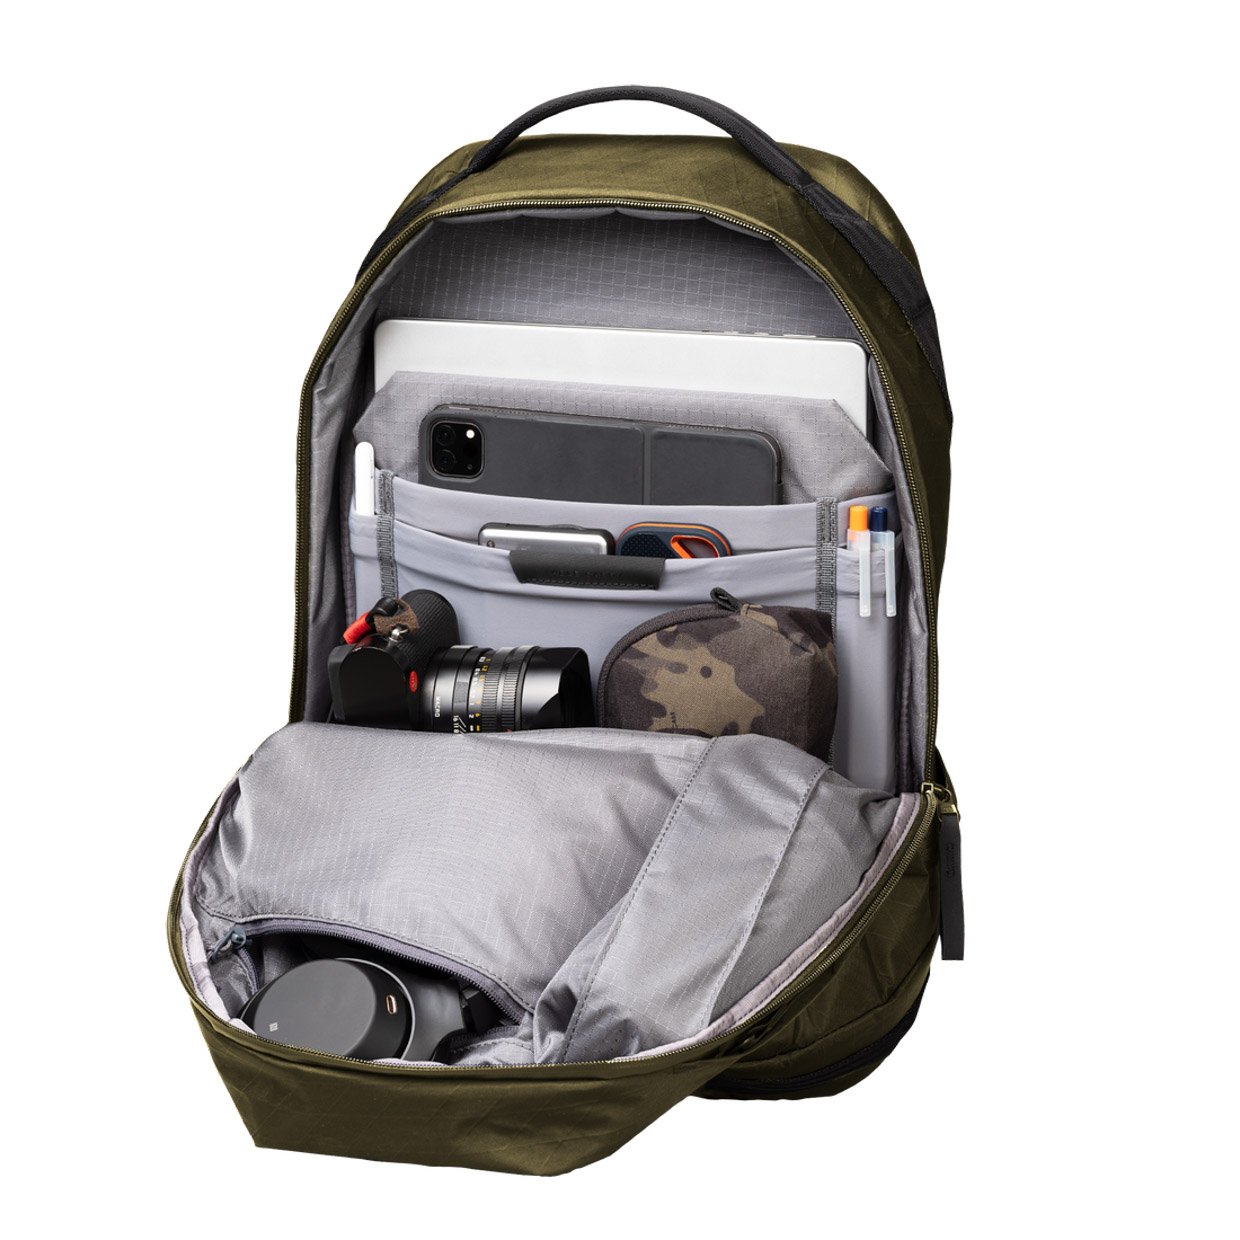 Able Carry Daily Plus Backpack